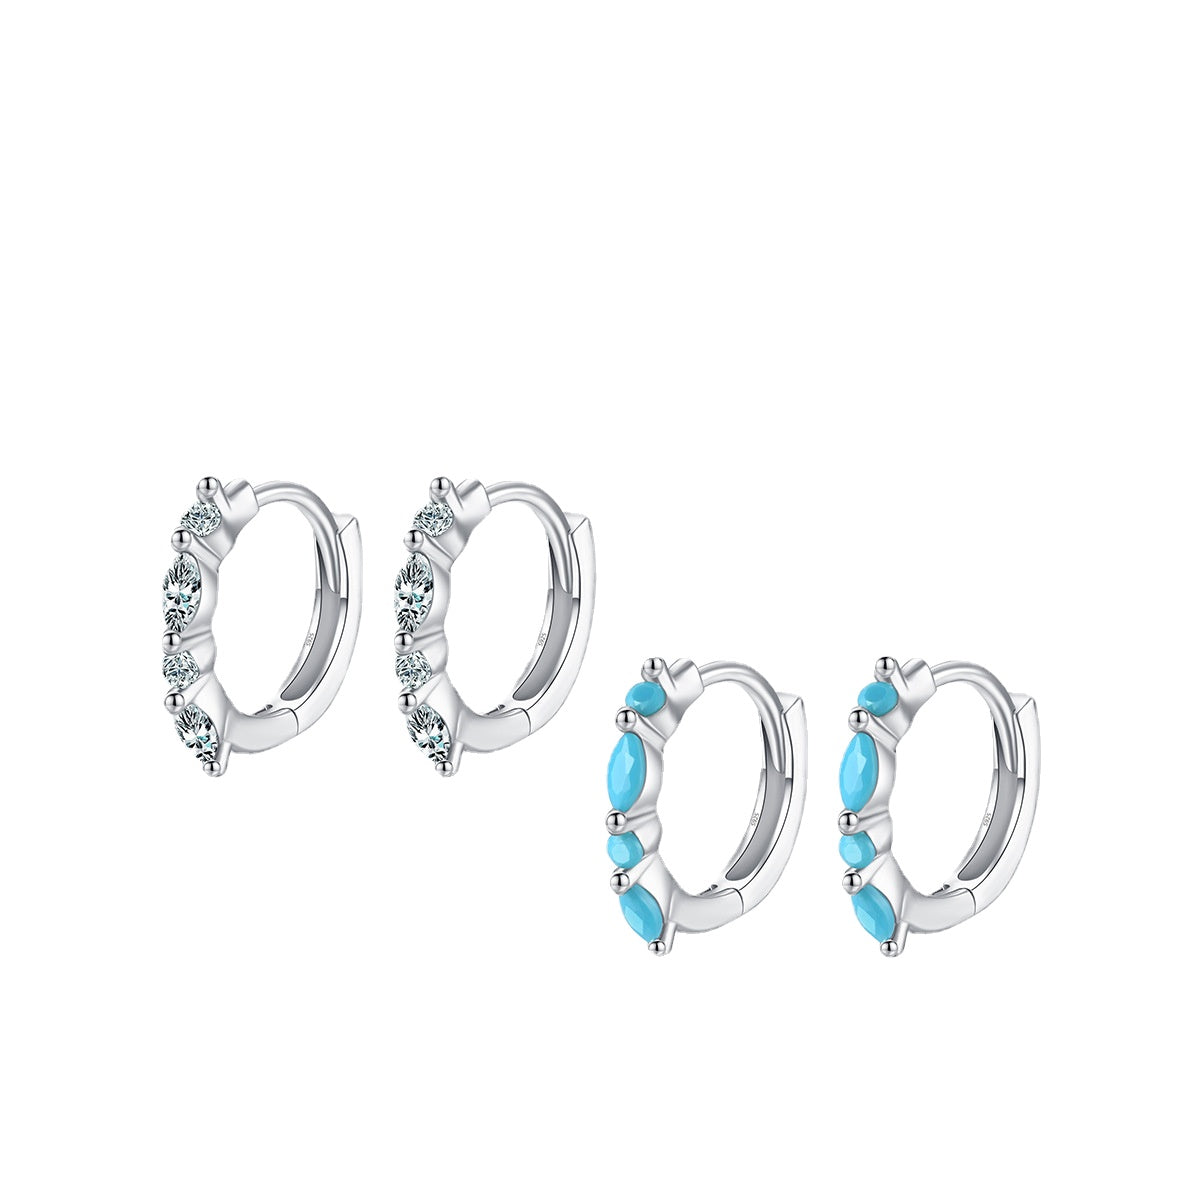 Simple and Elegant Turquoise Sterling Silver Earrings